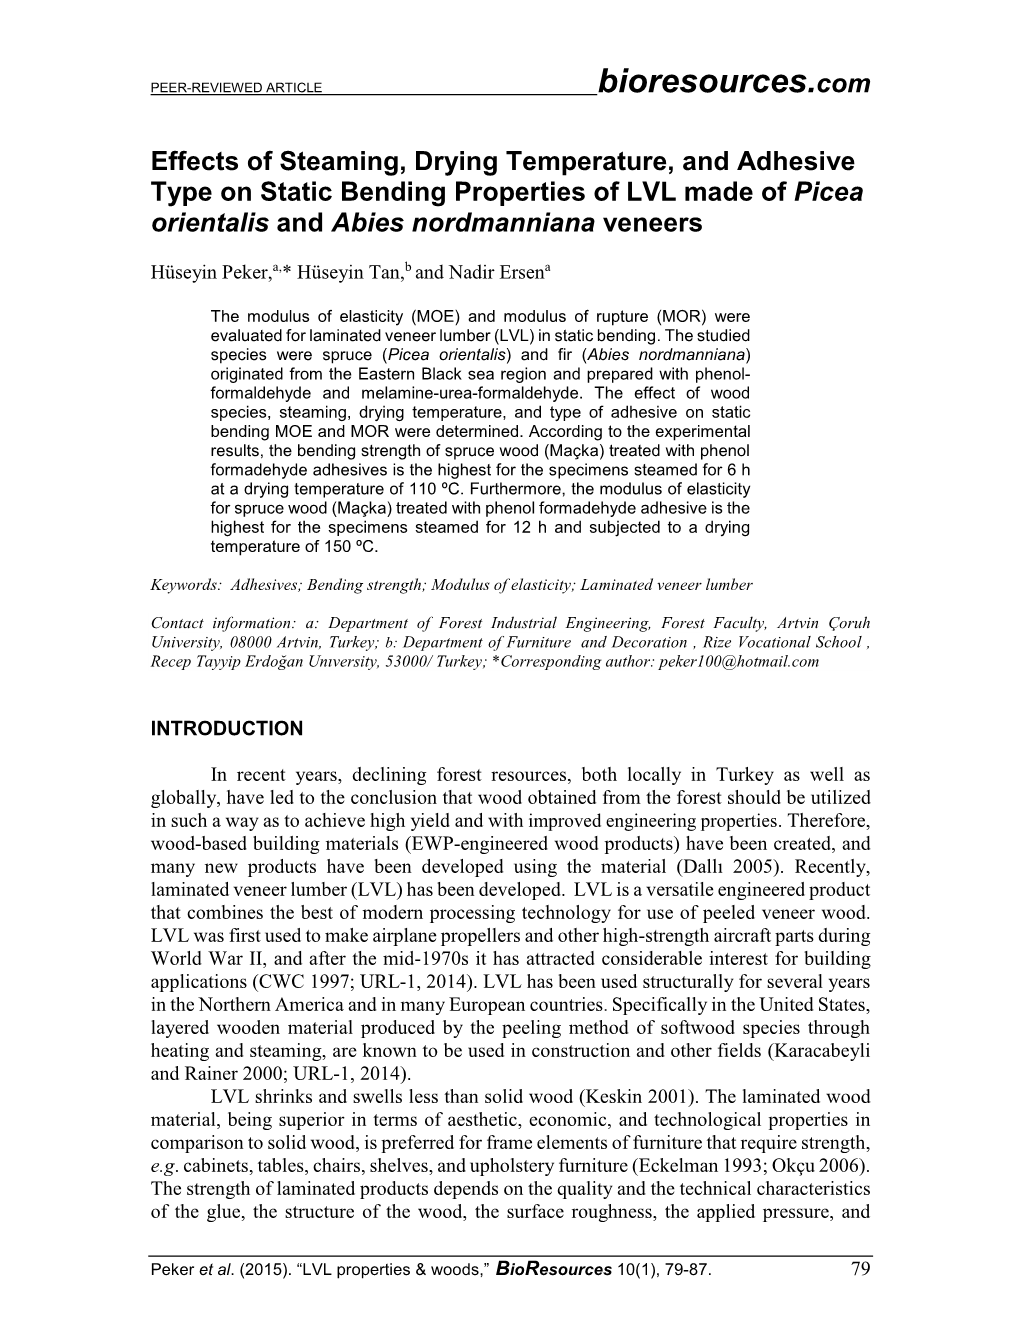 Effects of Steaming, Drying Temperature, and Adhesive Type on Static Bending Properties of LVL Made of Picea Orientalis and Abies Nordmanniana Veneers